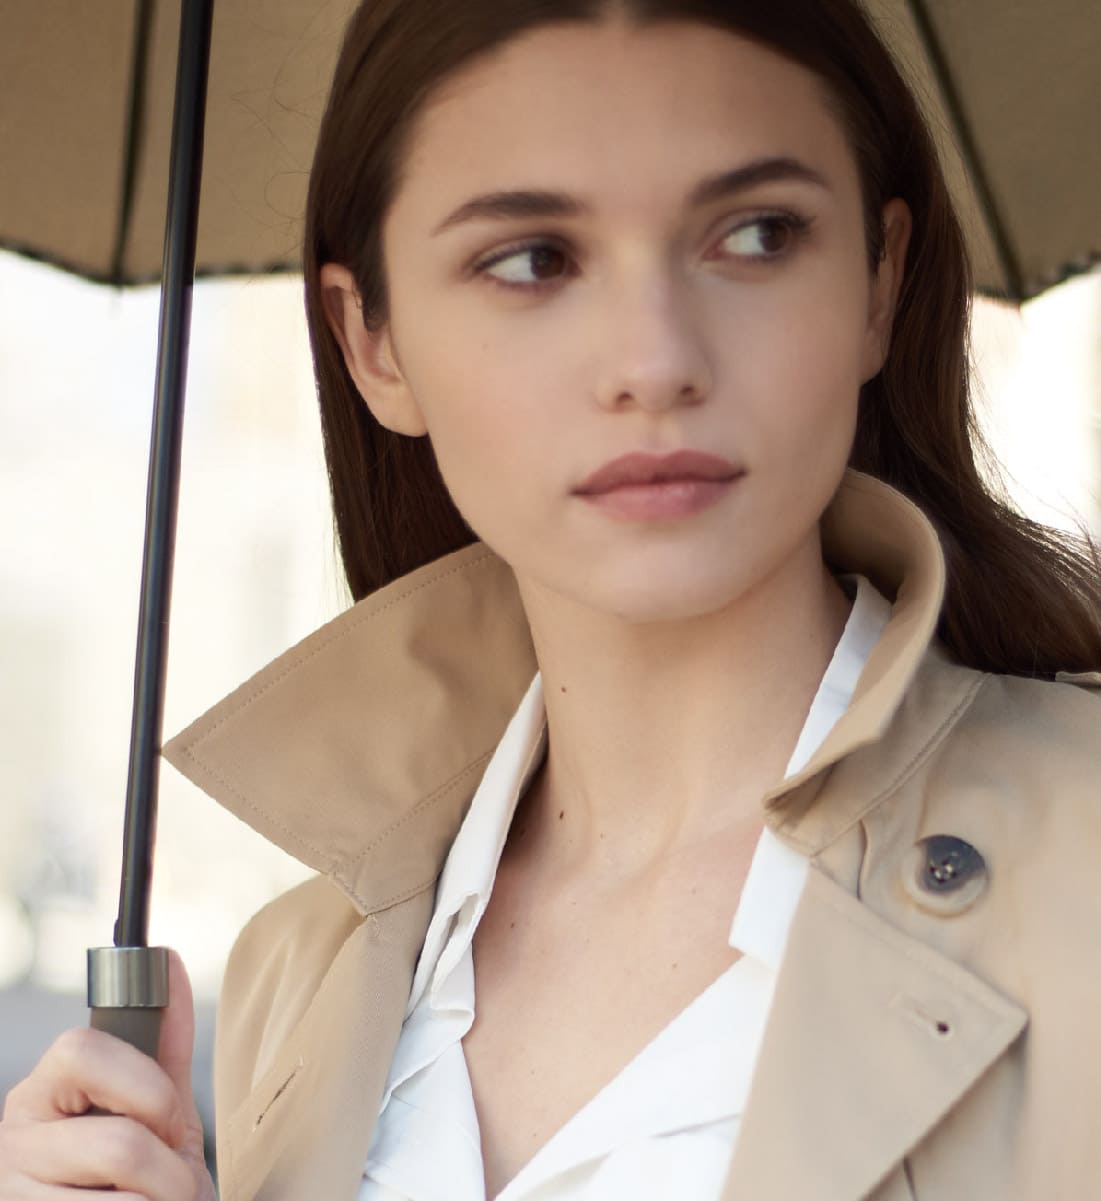 Trench or raincoat? The summer outwear